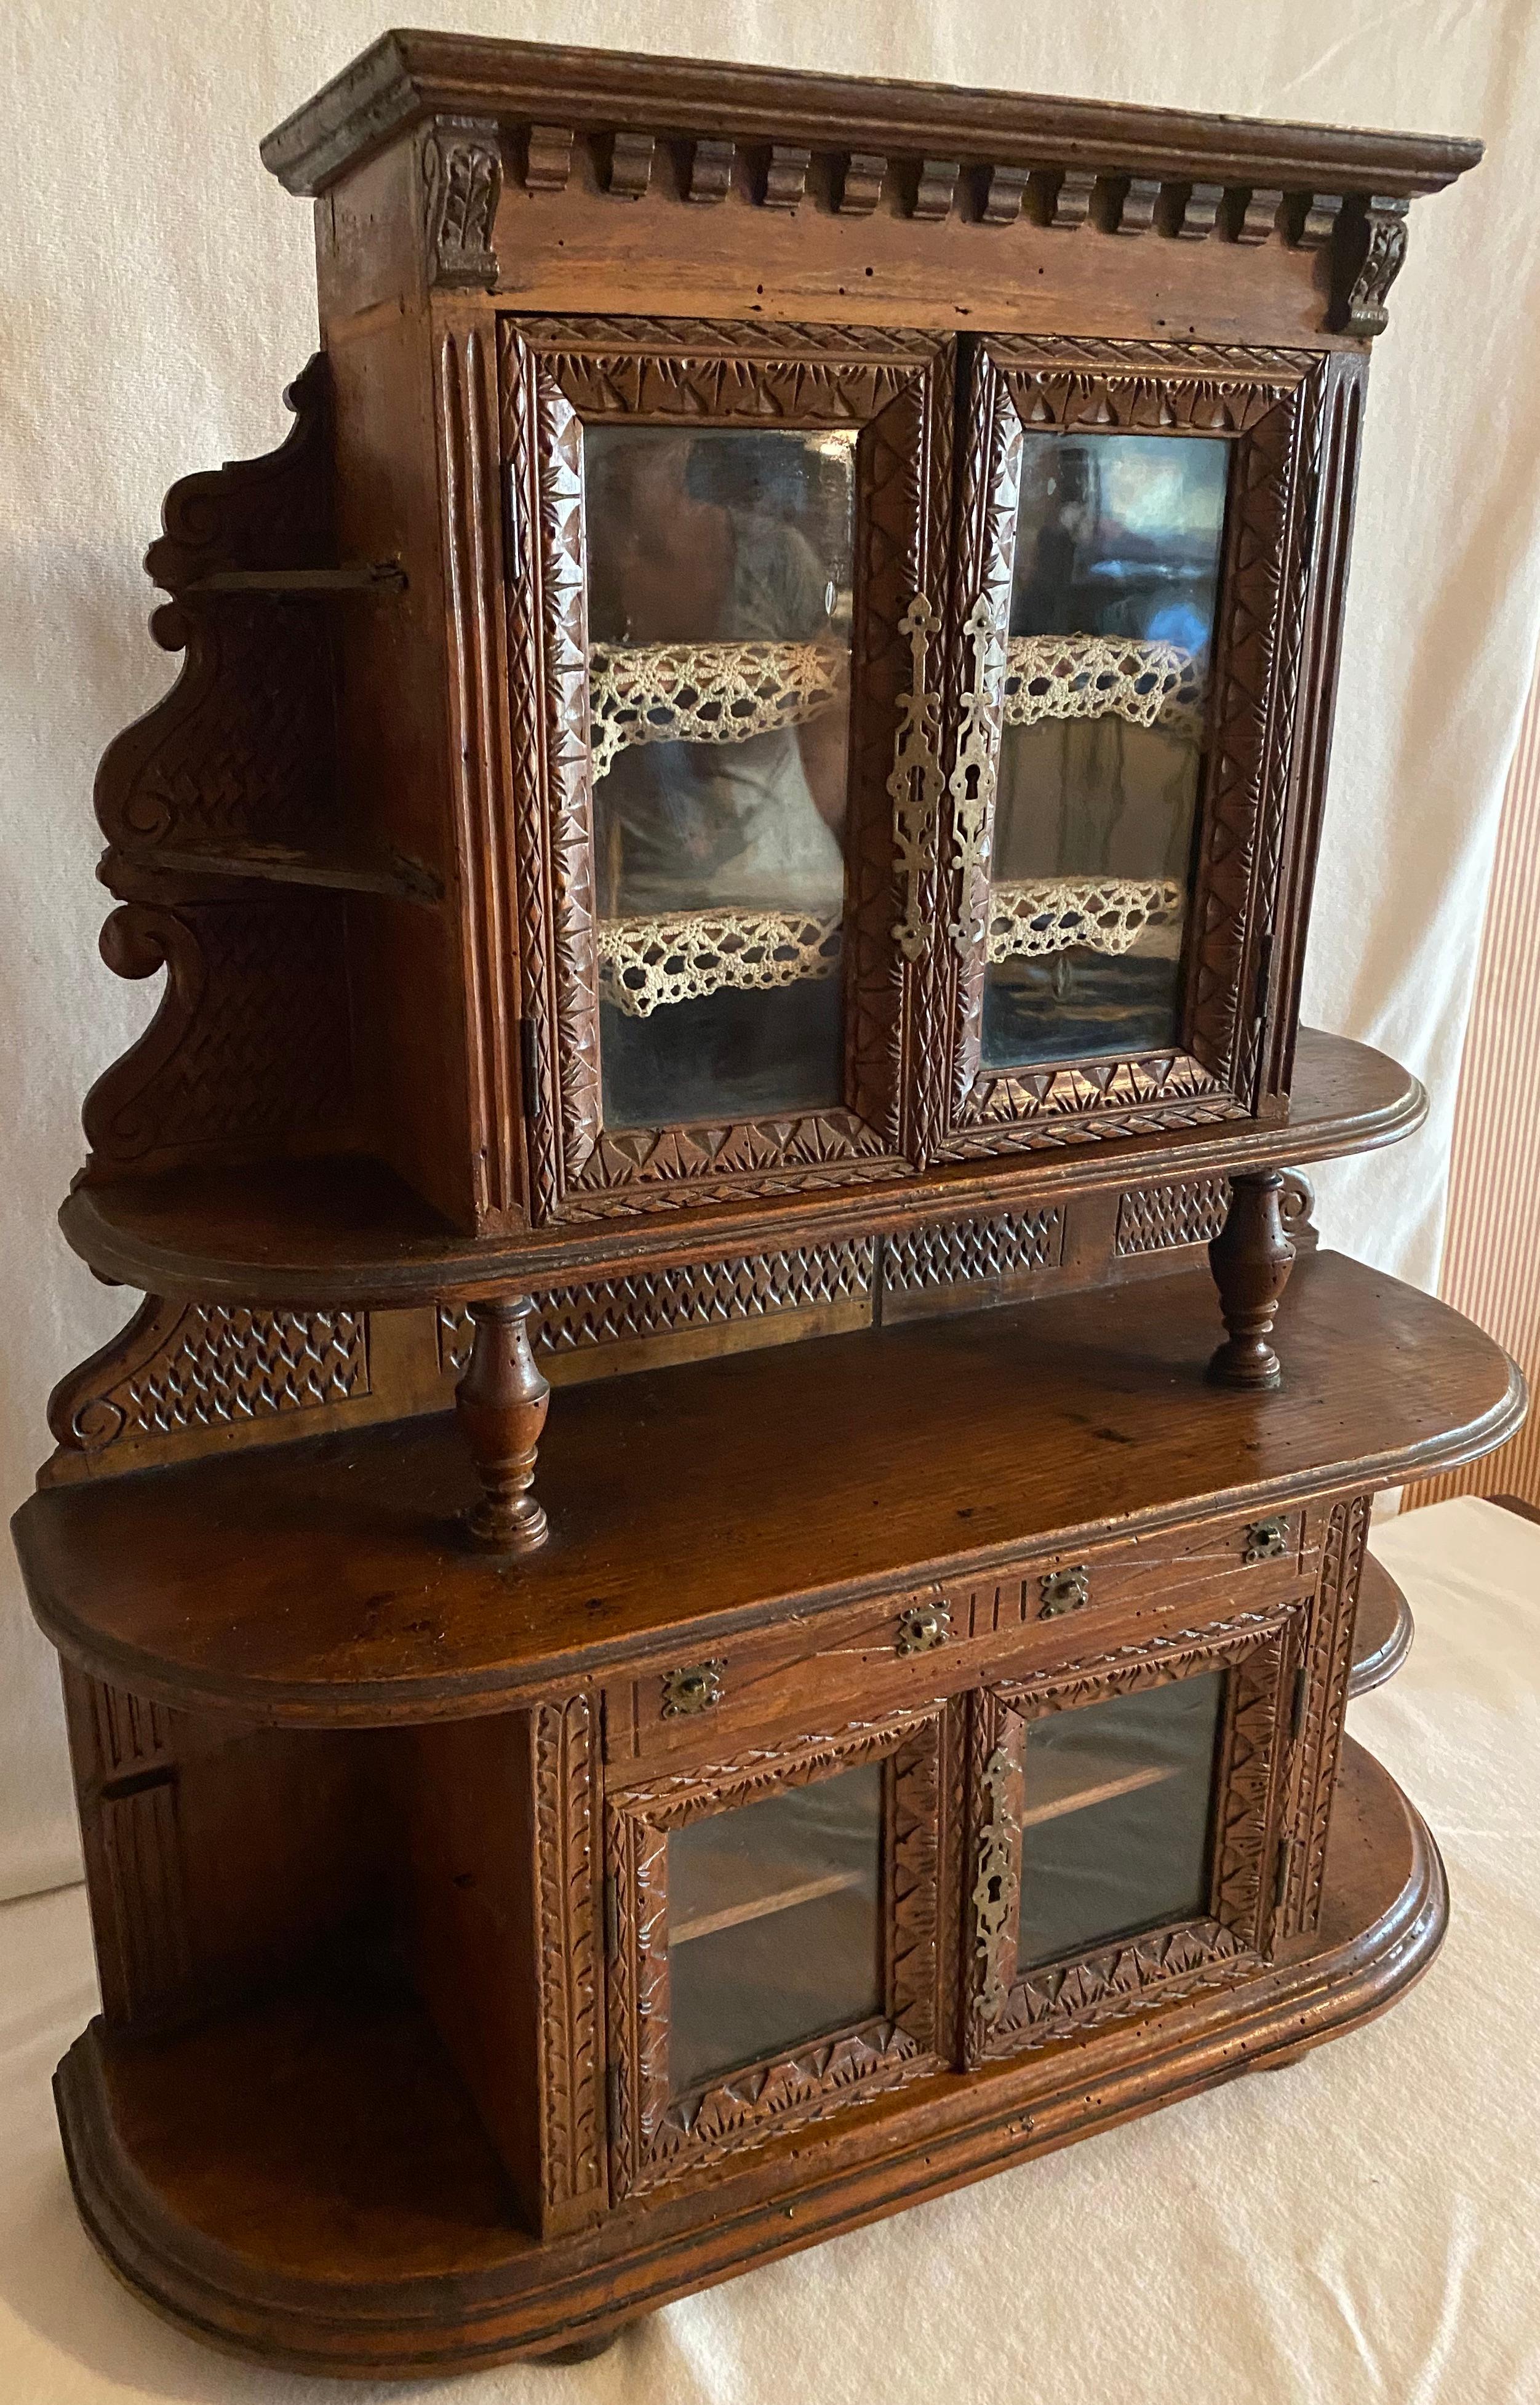 A wonderful miniature china cabinet, turn of the century, probably a
sales man's China Hutch sample. Lovely carved details, glass doors framed
with hand carved details. Some minor worming, and some age related
wood shrinkage of the back boards.
  